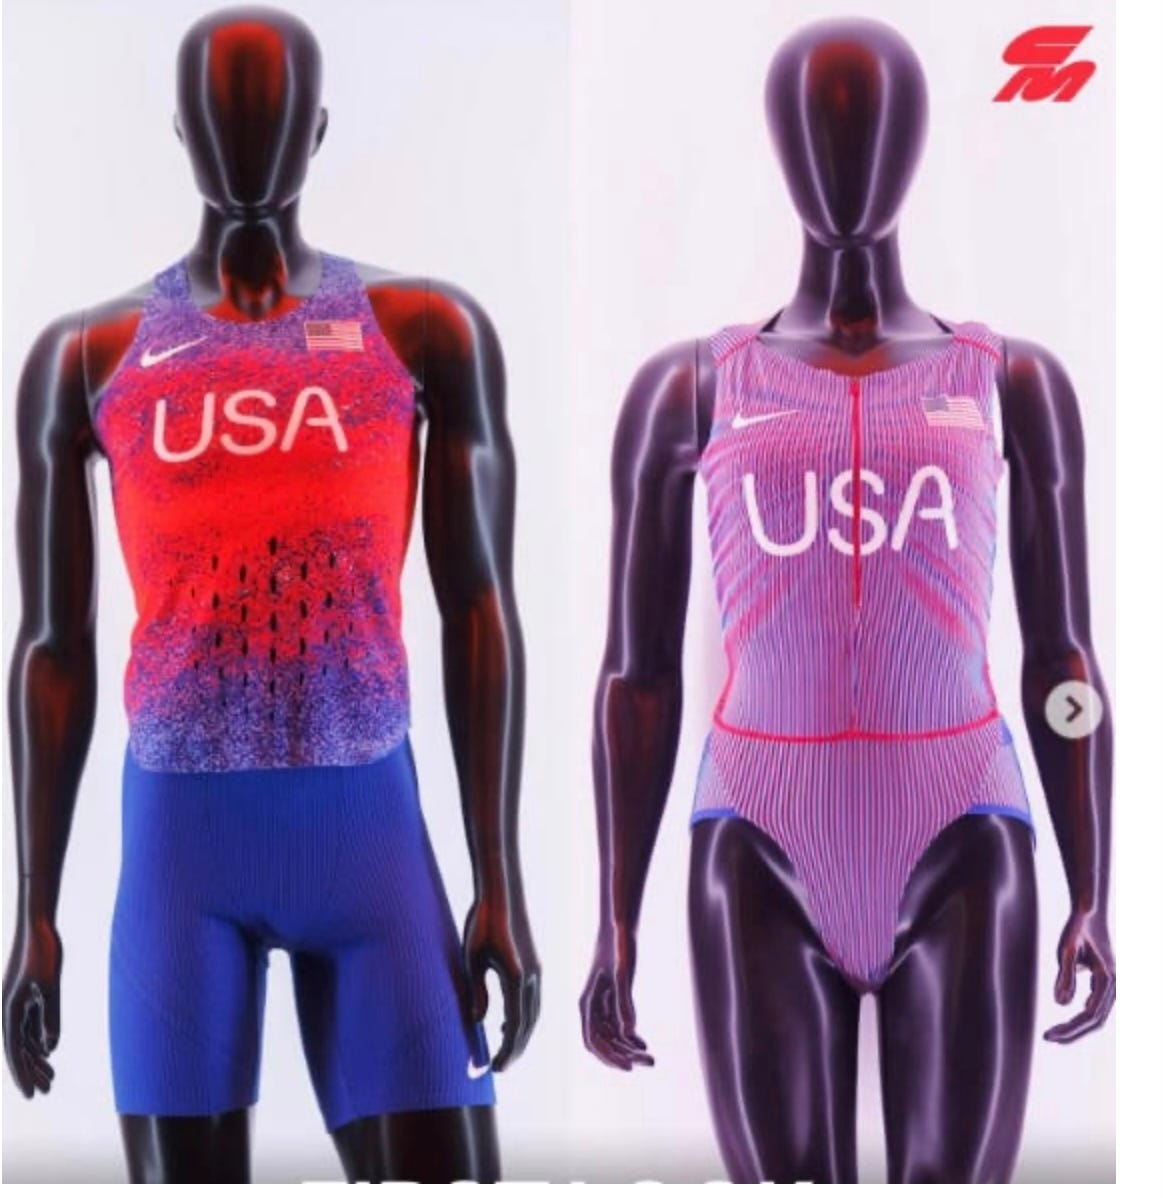 A photo of two mannequins wearing USA kit for the Paris Olympics. The female manniquin's kit is so revealing that it would require a Brazilian wax and additional underwear.